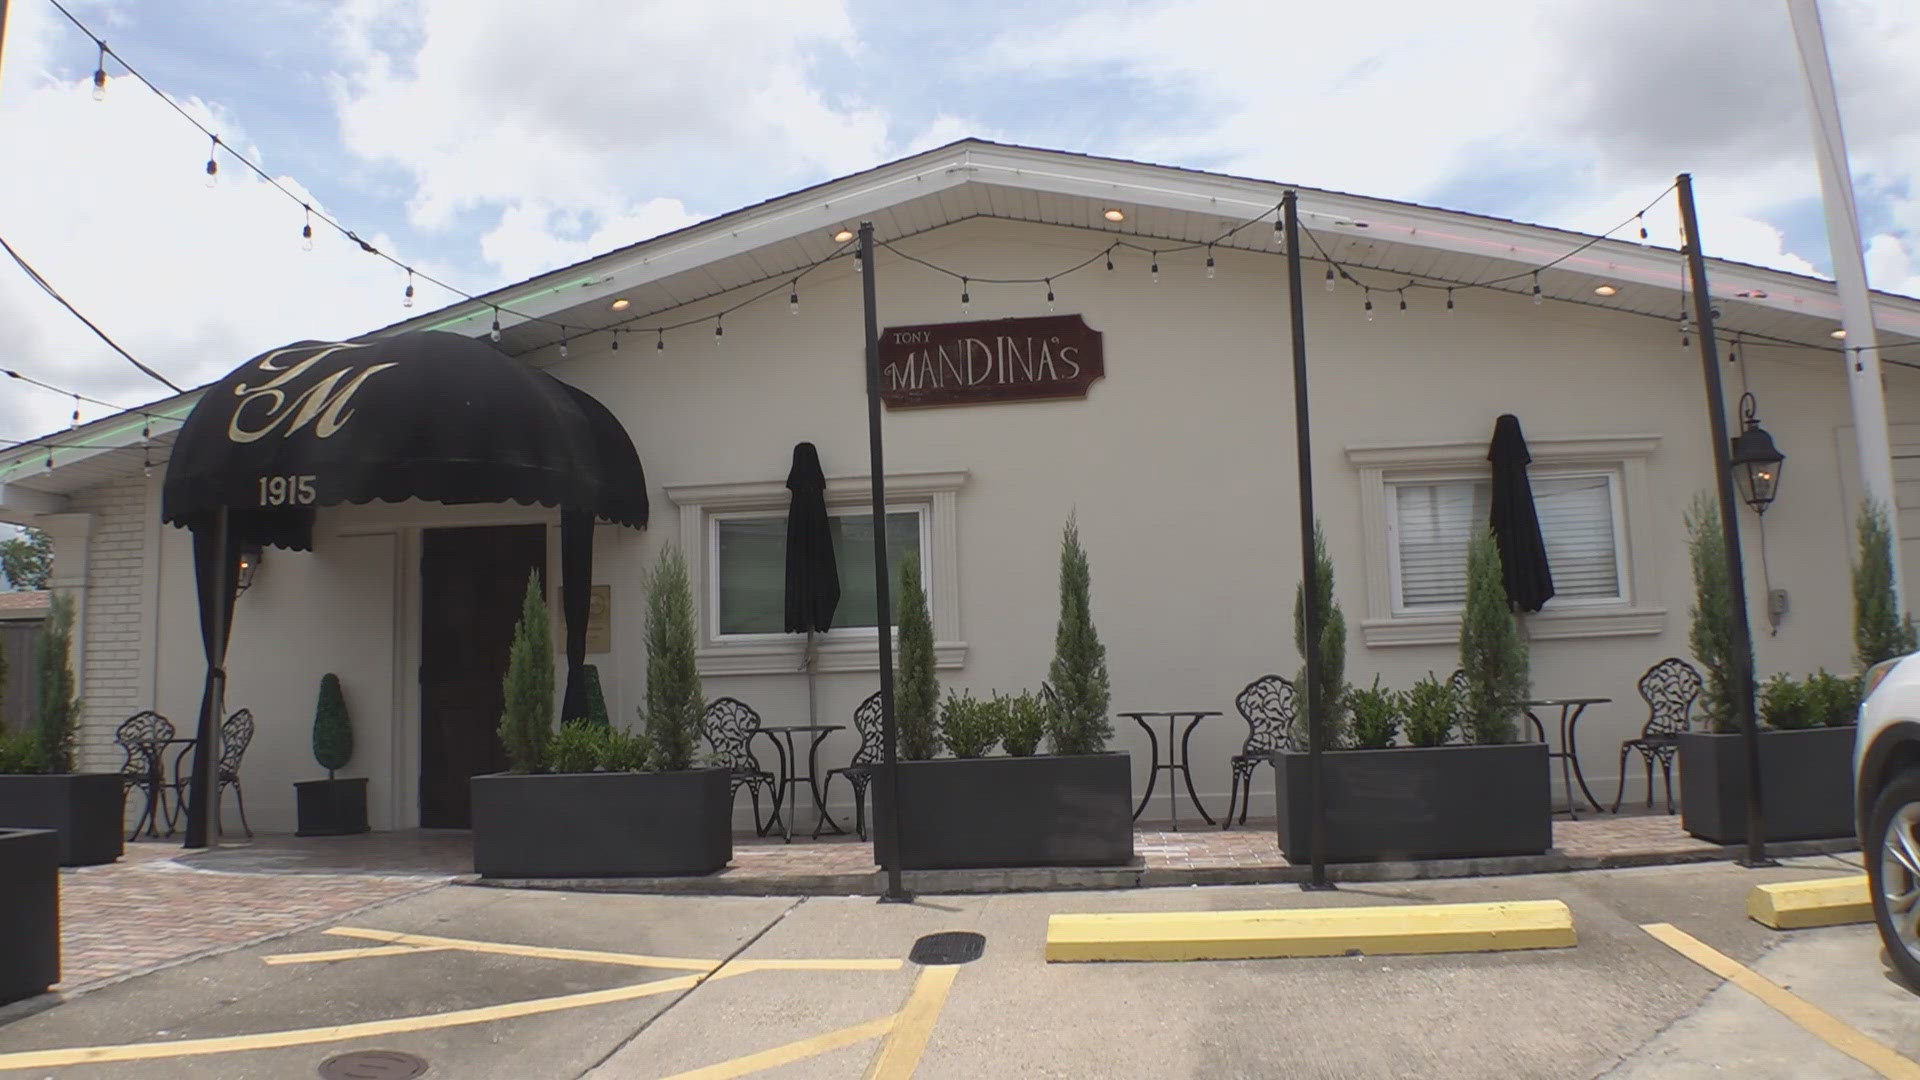 On Saturday, Westbank Italian restaurant Tony Mandina's will open their doors for the final time.